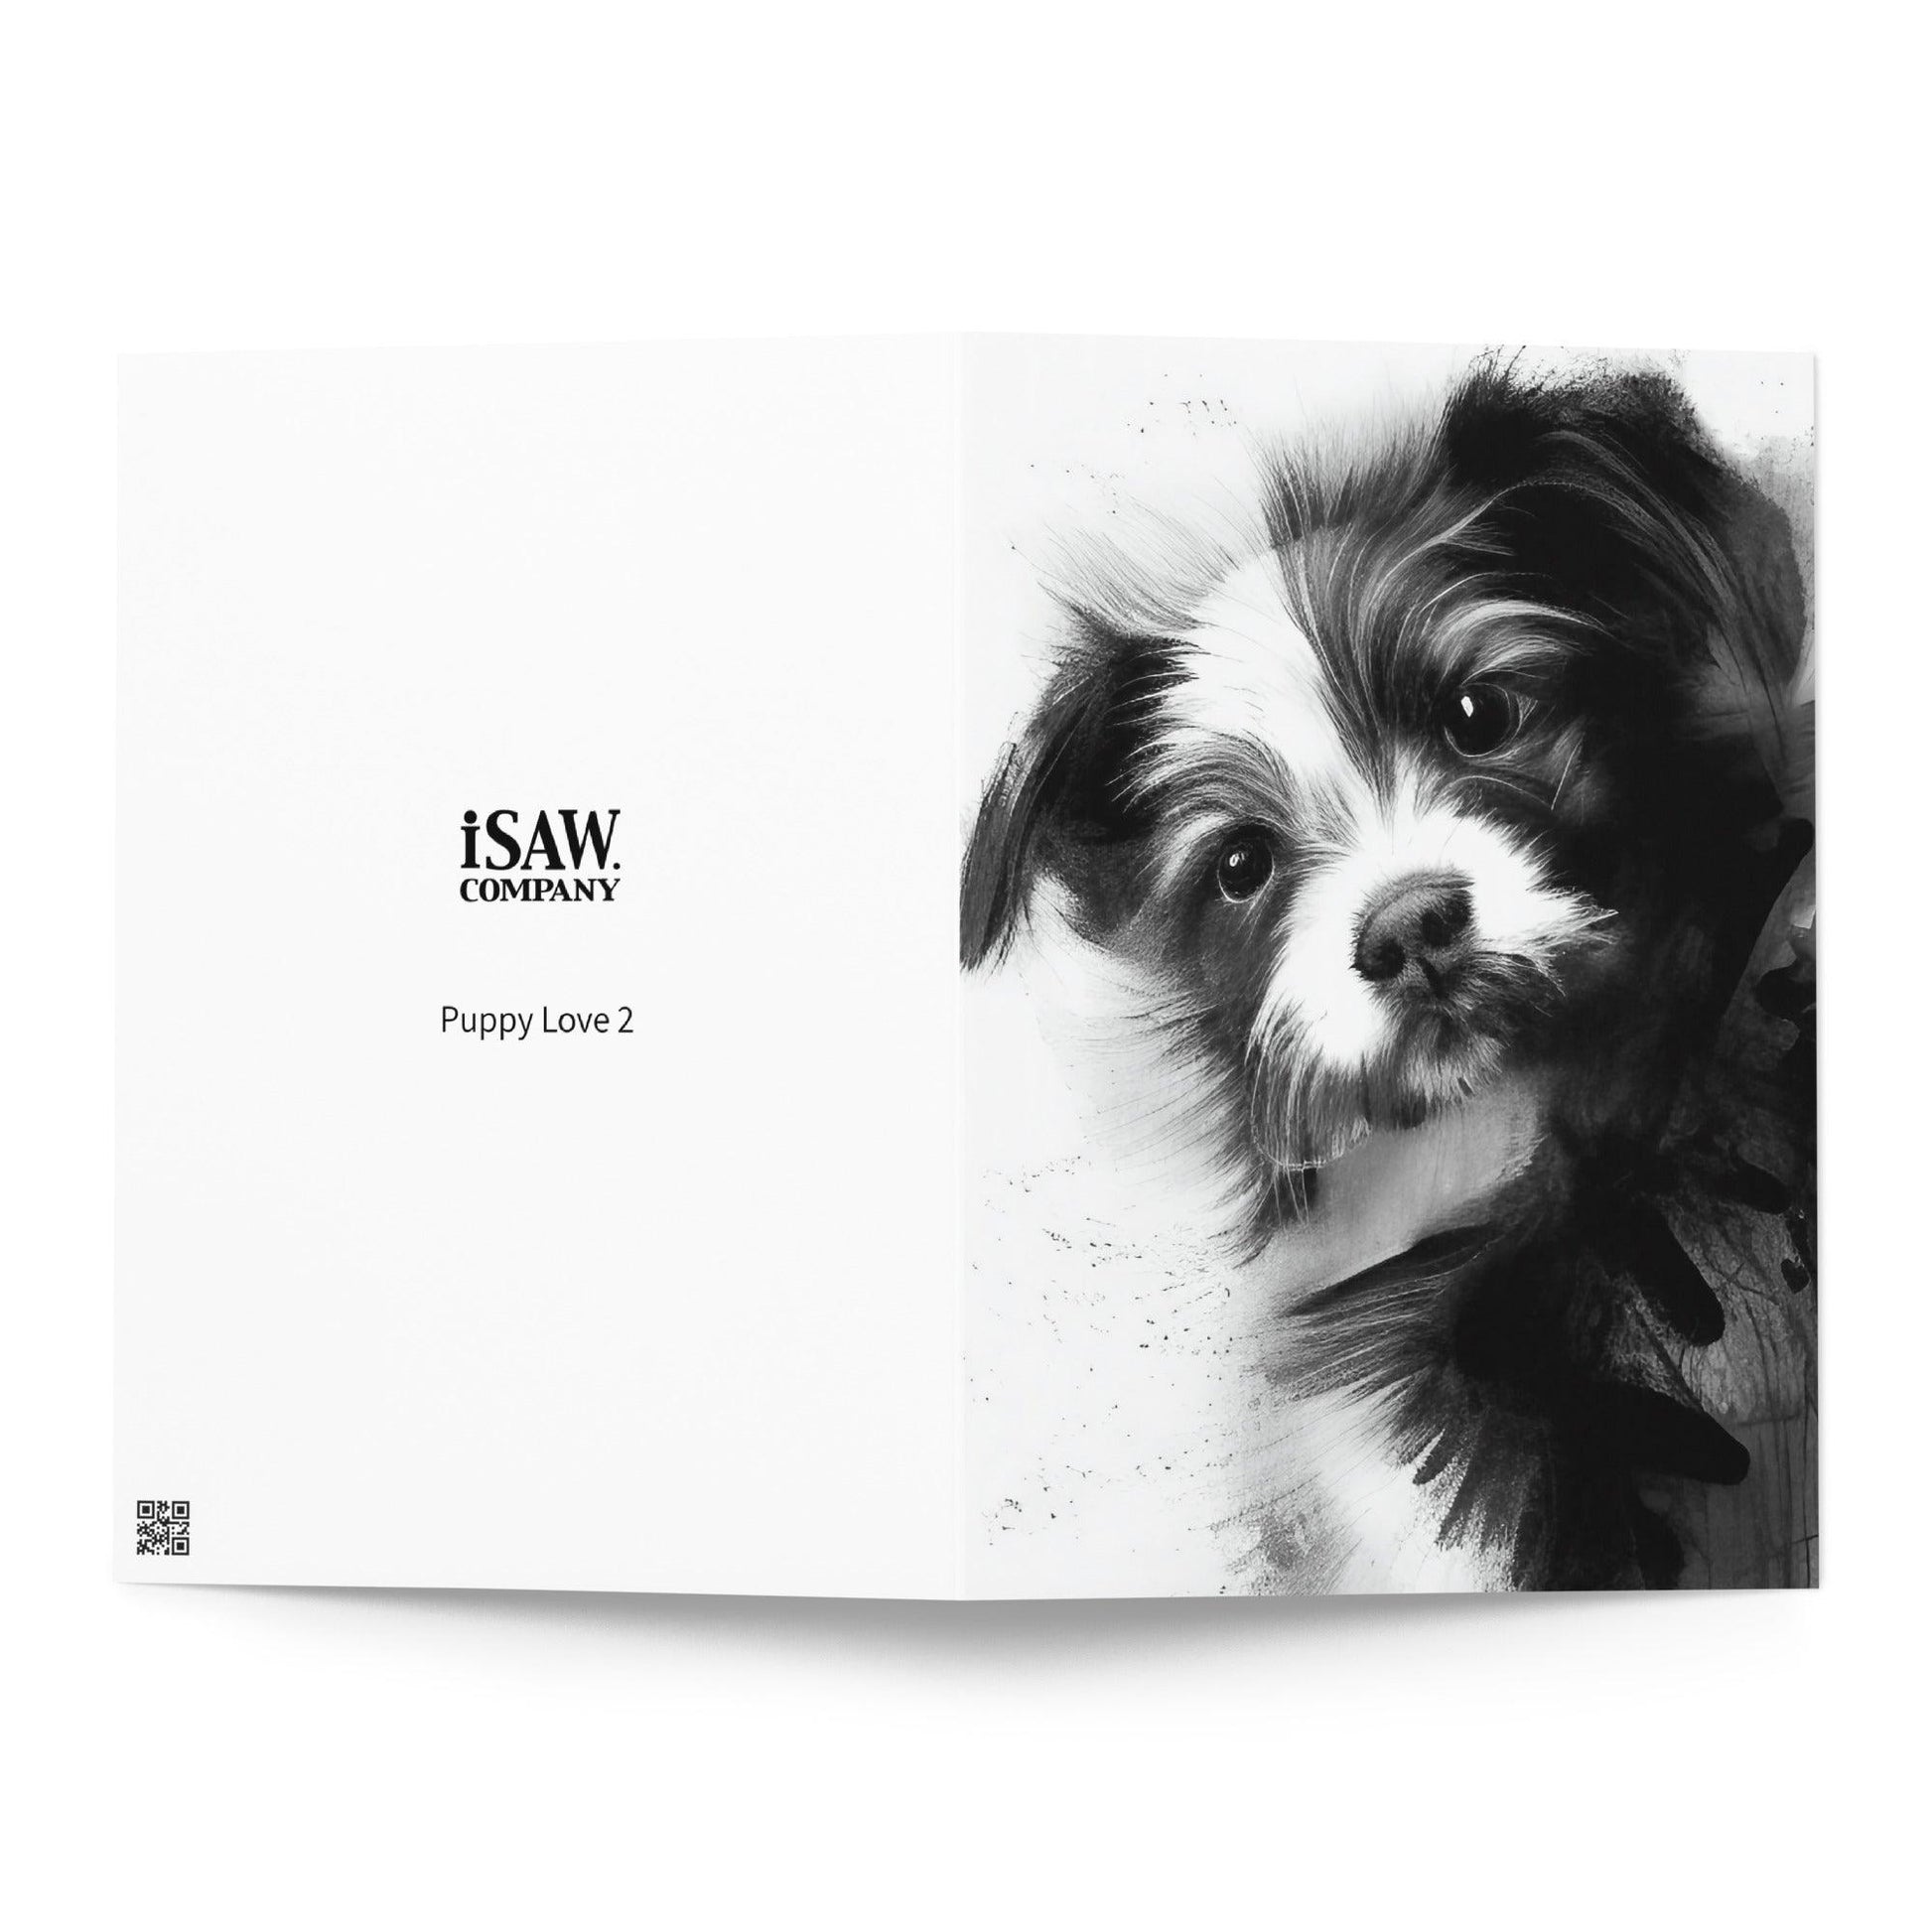 Puppy Love 2 - Note Card - iSAW Company